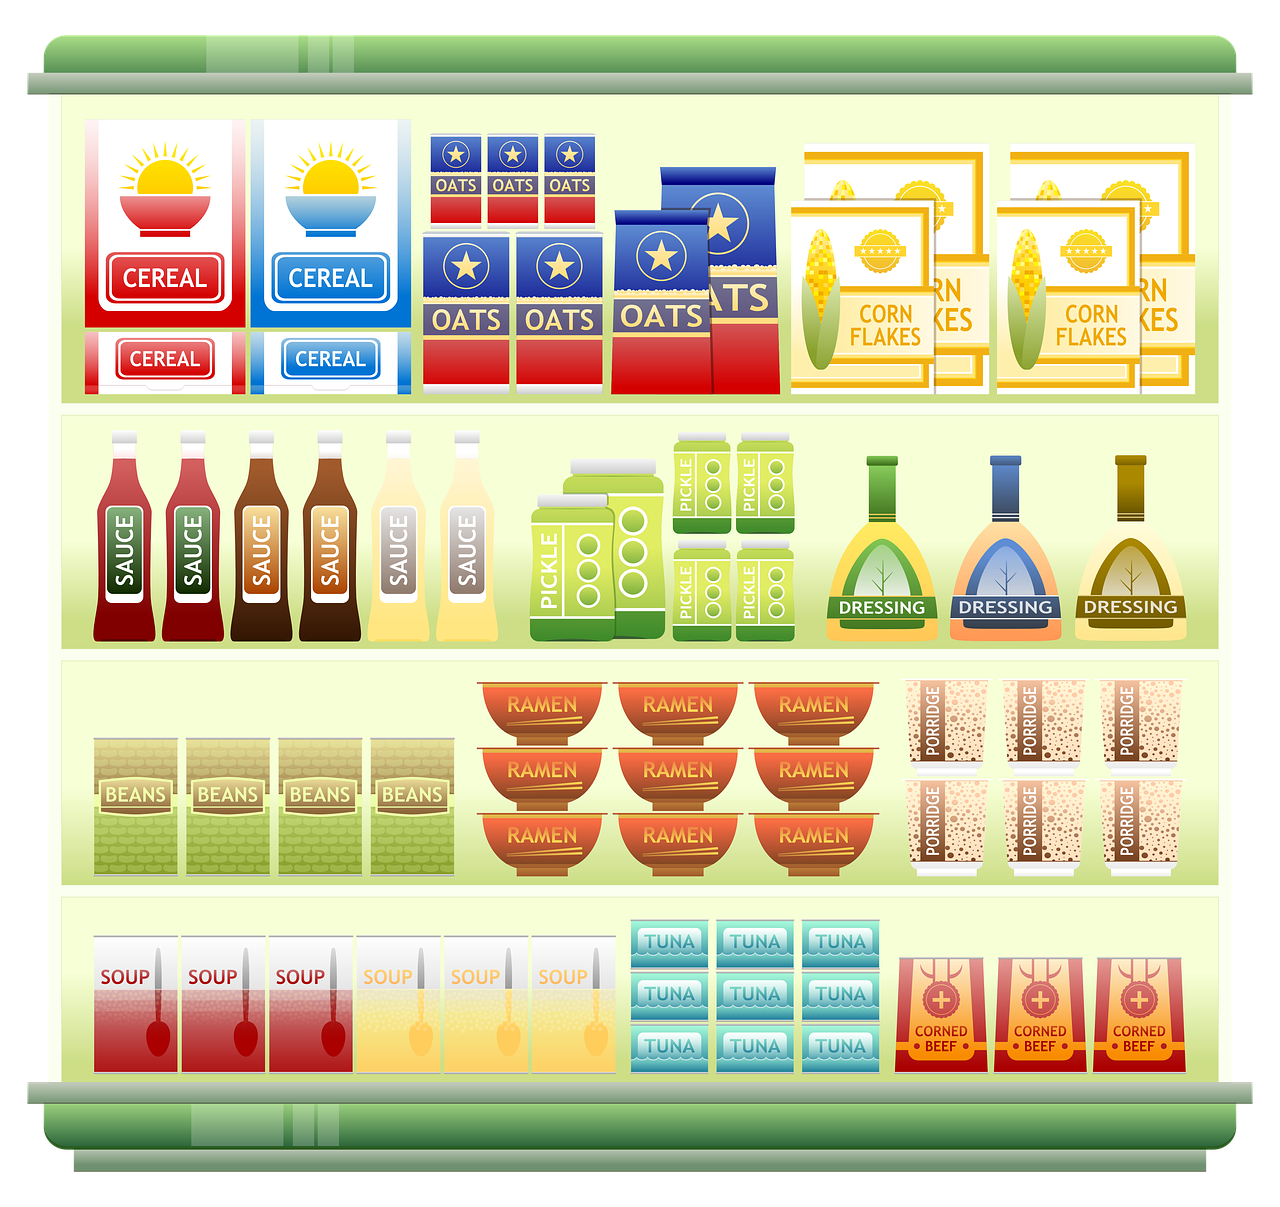 grocery store aisle clipart